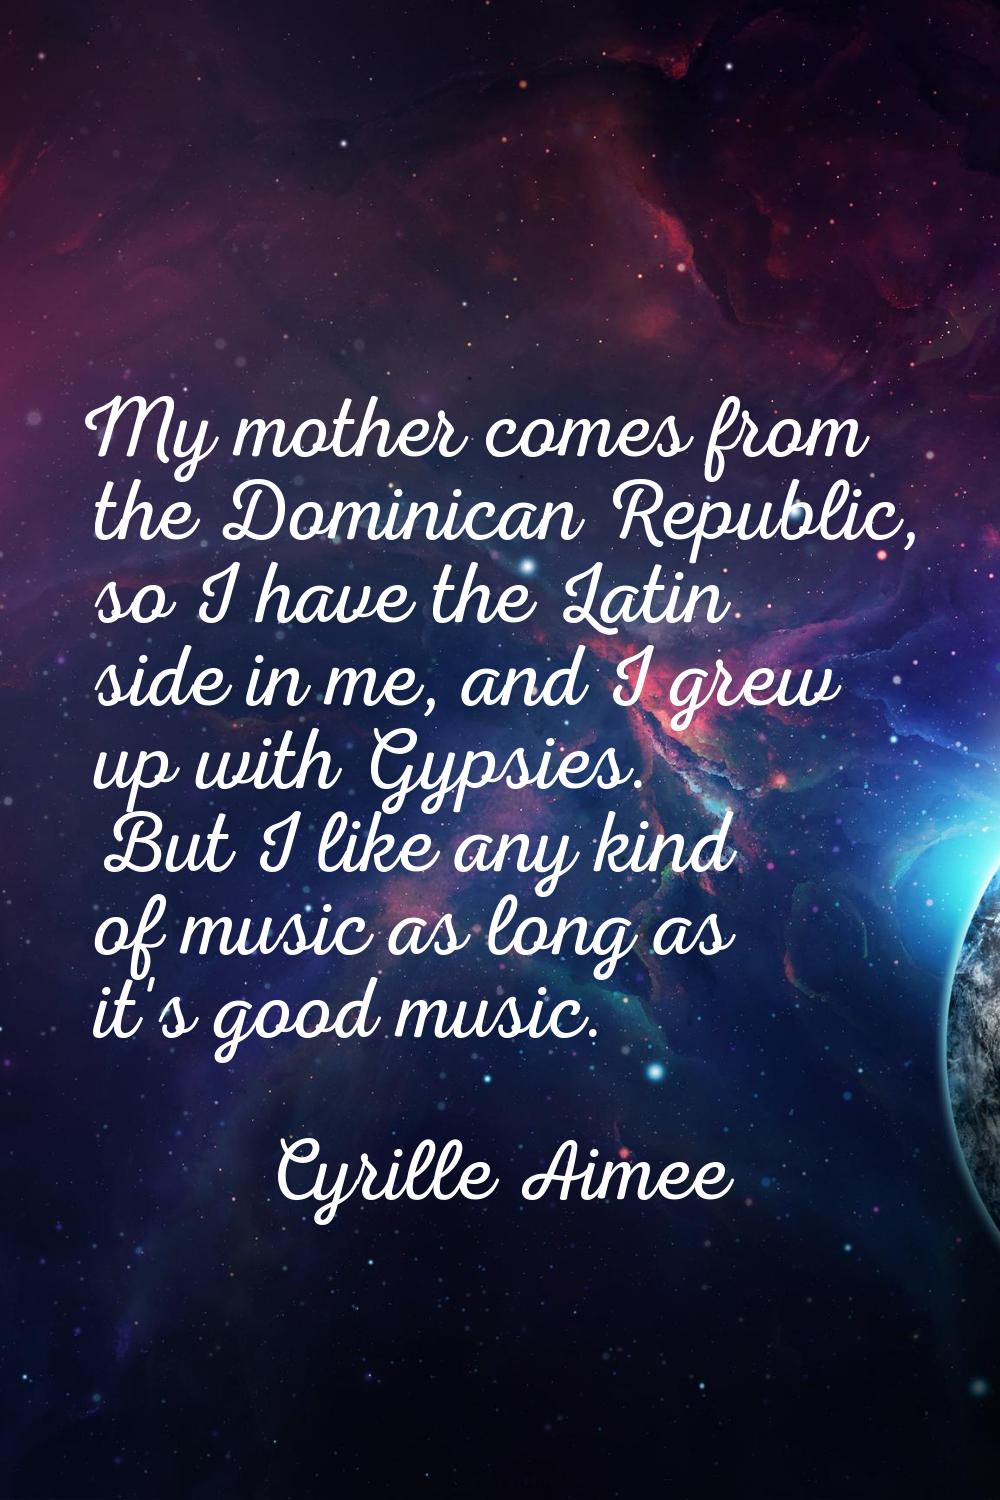 My mother comes from the Dominican Republic, so I have the Latin side in me, and I grew up with Gyp